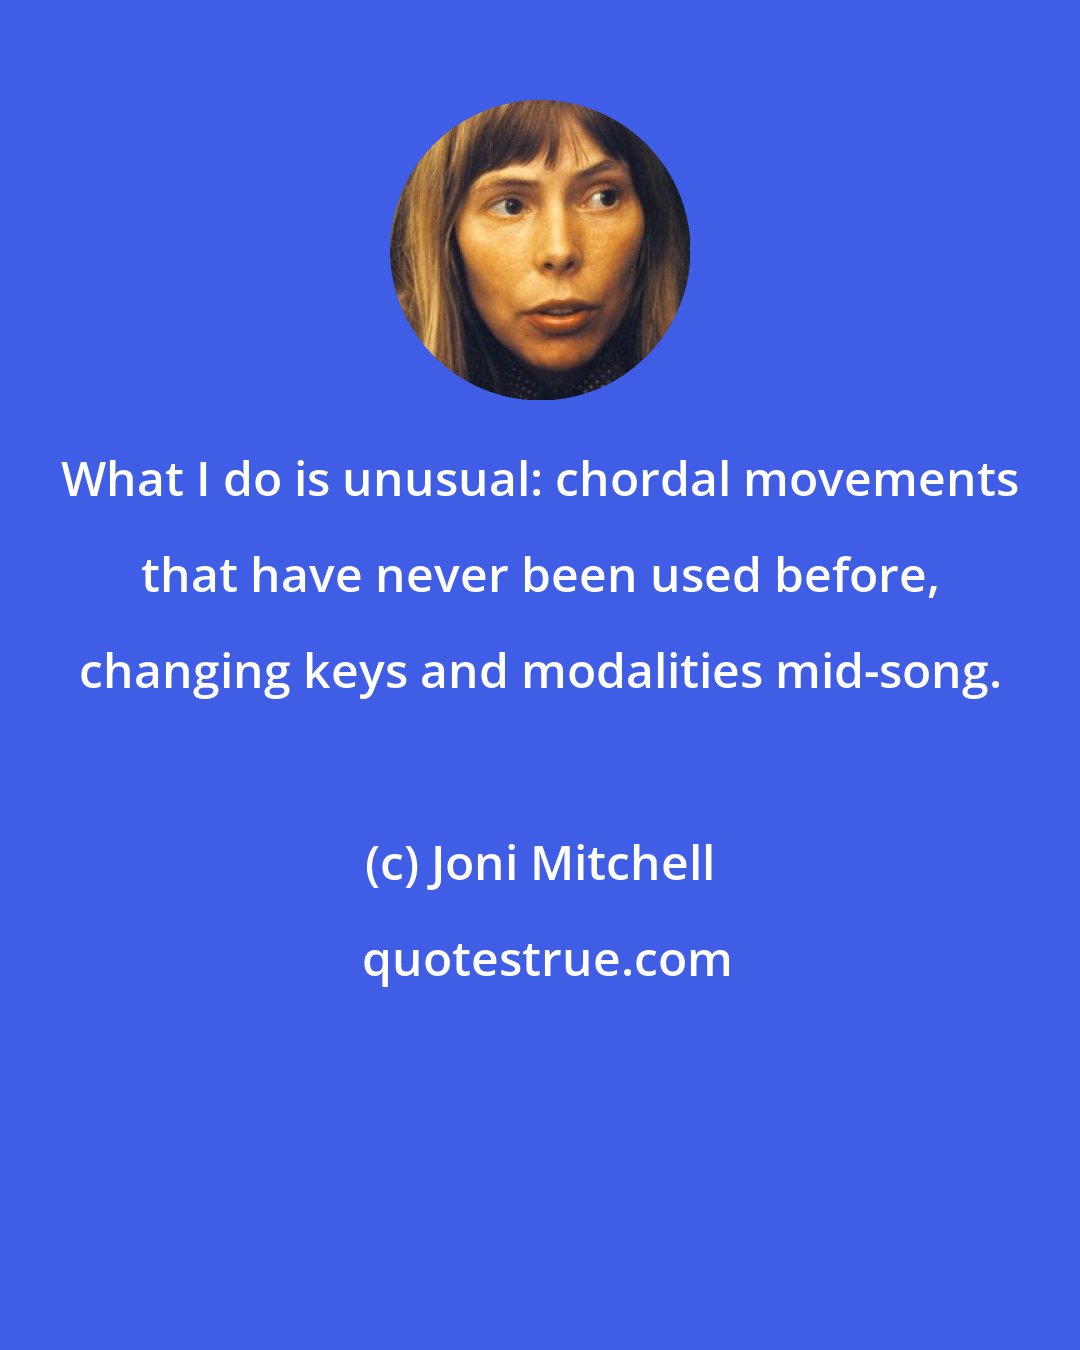 Joni Mitchell: What I do is unusual: chordal movements that have never been used before, changing keys and modalities mid-song.